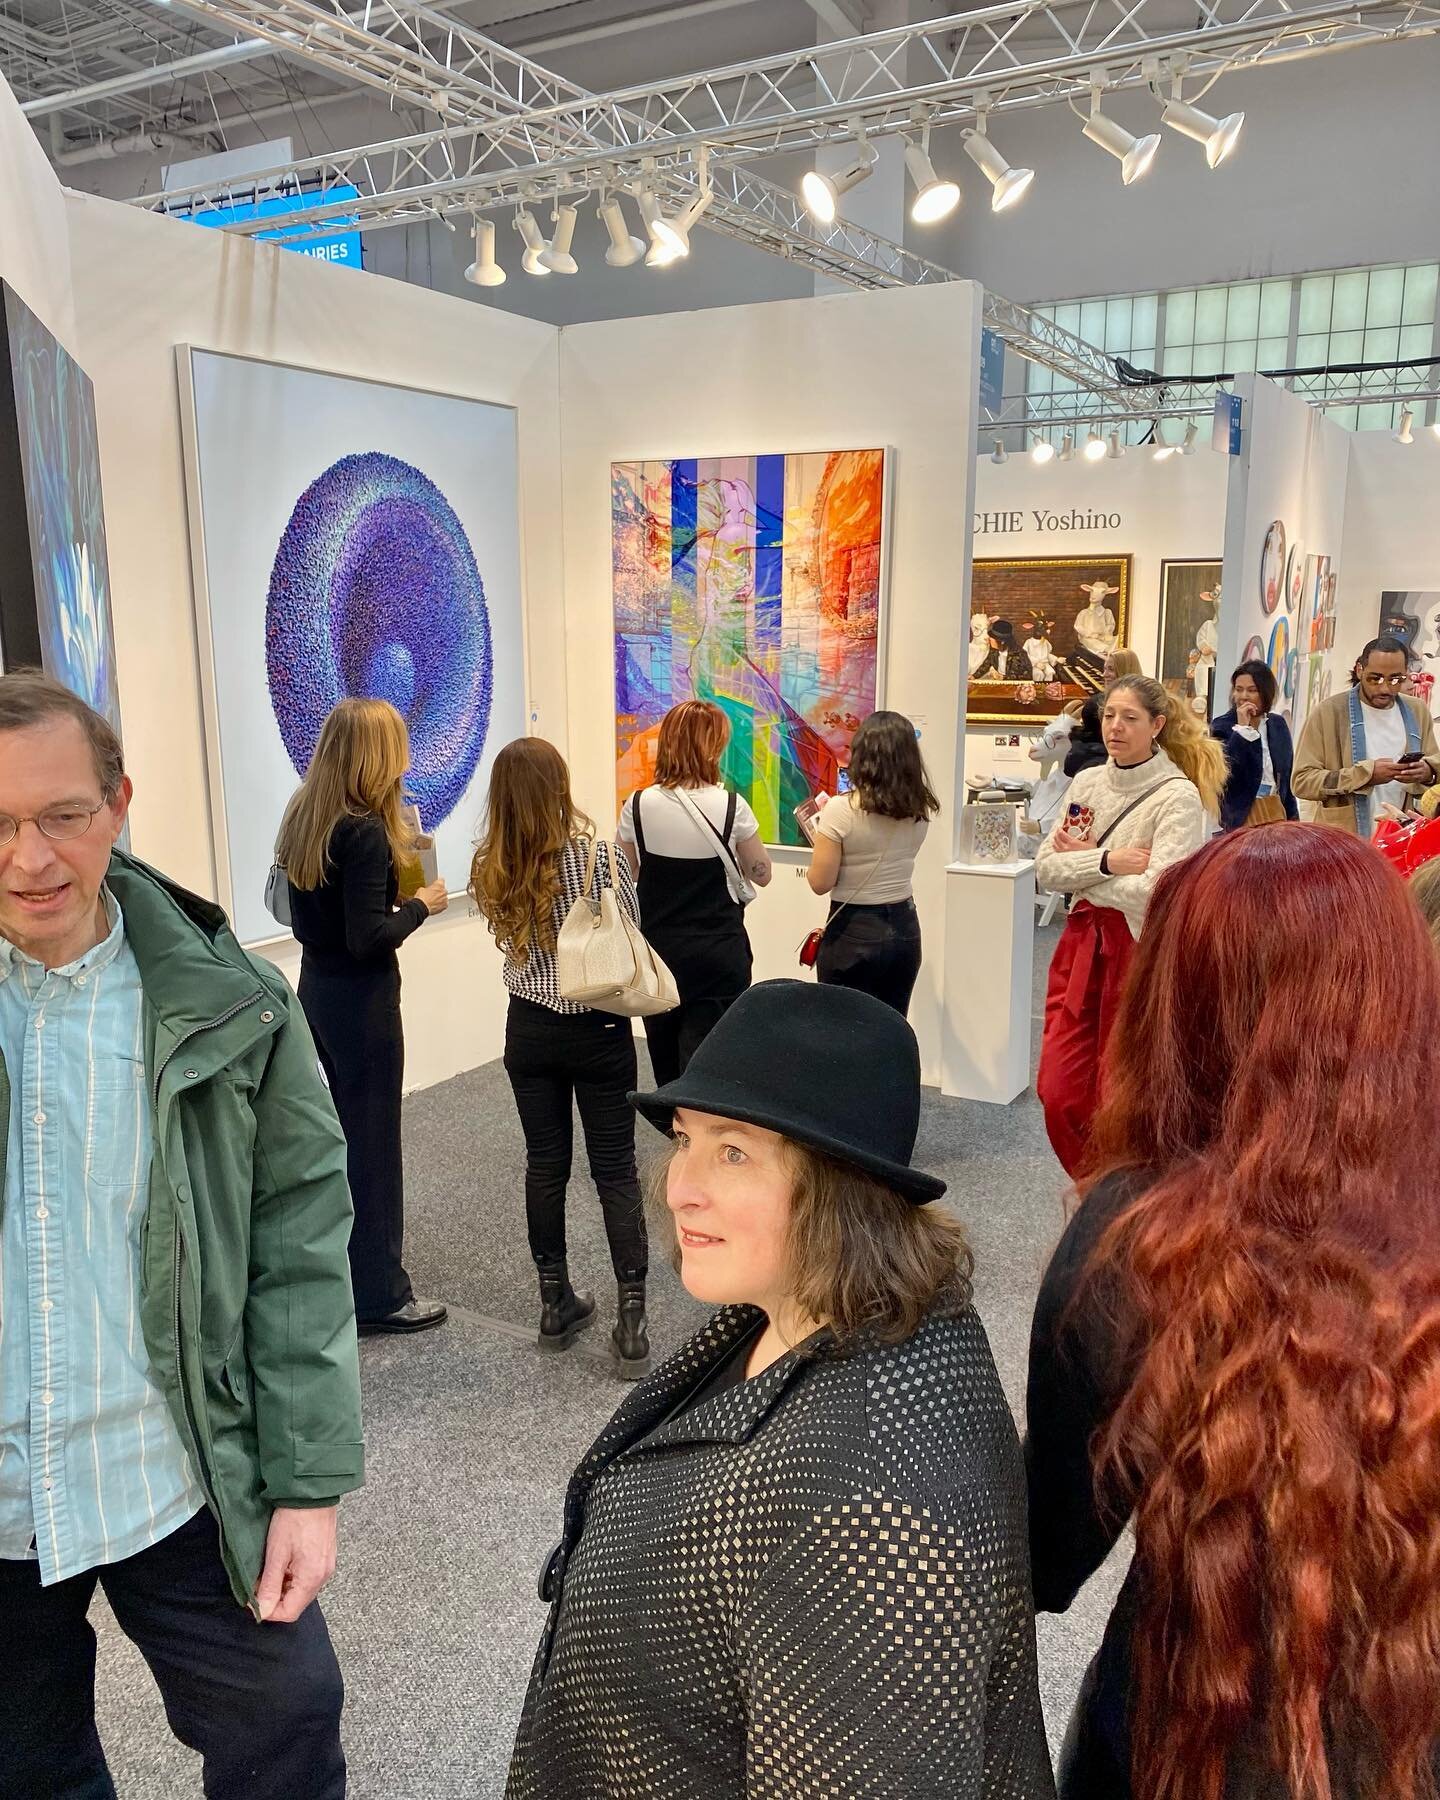 Art is back and living large in #NYC Busiest opening night in years @artexponewyork Huge fair happening all weekend! #dontmissit